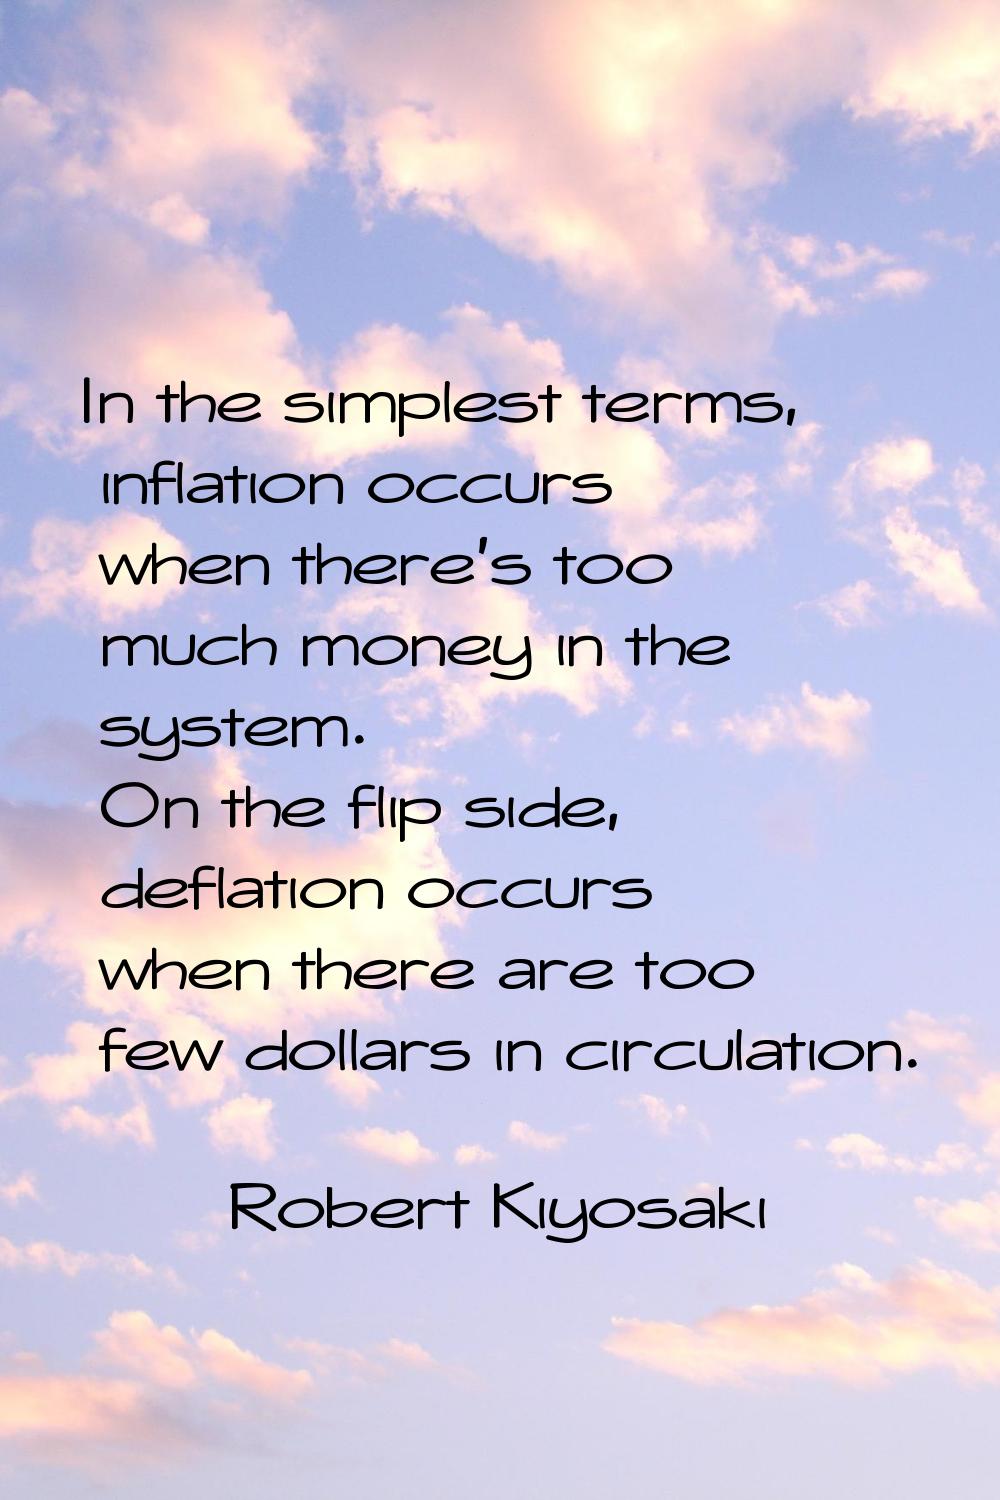 In the simplest terms, inflation occurs when there's too much money in the system. On the flip side